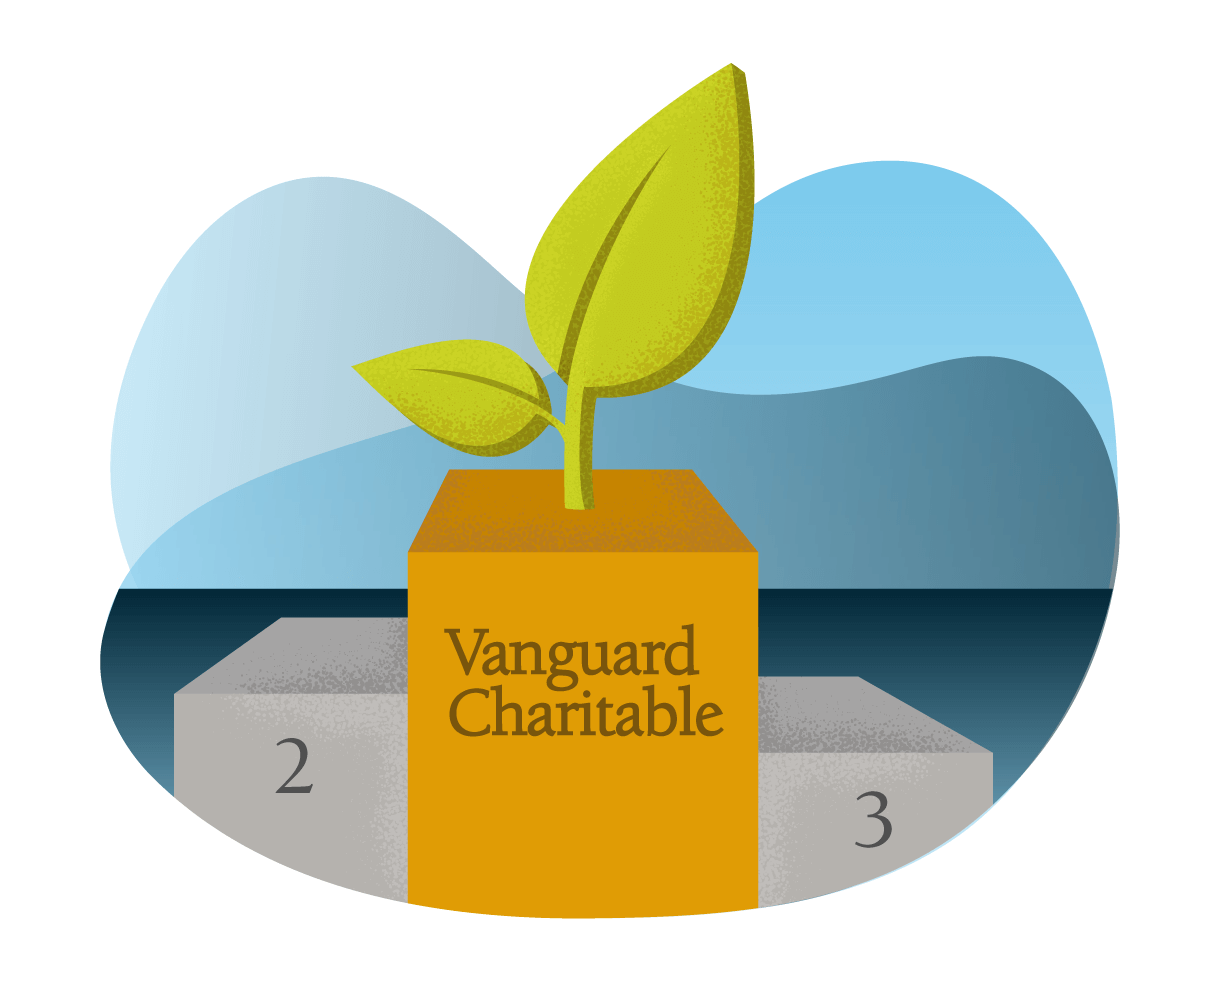 Vanguard Charitable's logo, two green leaves, is featured in first place on a winner's podium. Second and third places are empty.